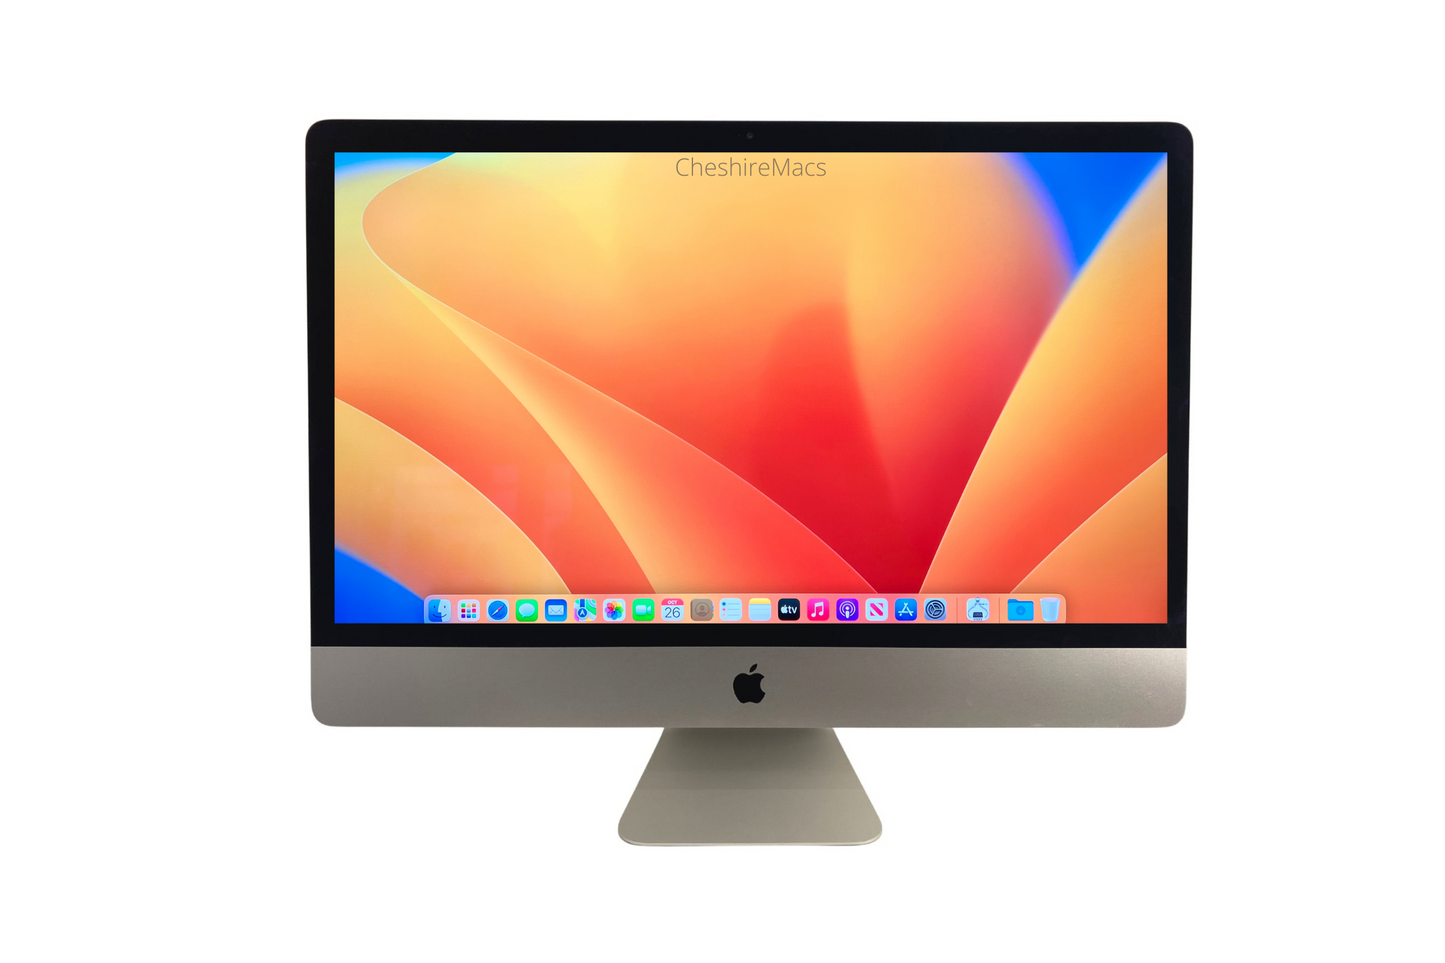 iMac 21.5 inch 4K 6-Core i5 3.0Ghz, 16gb, 2TB Solid State Drive (2017)